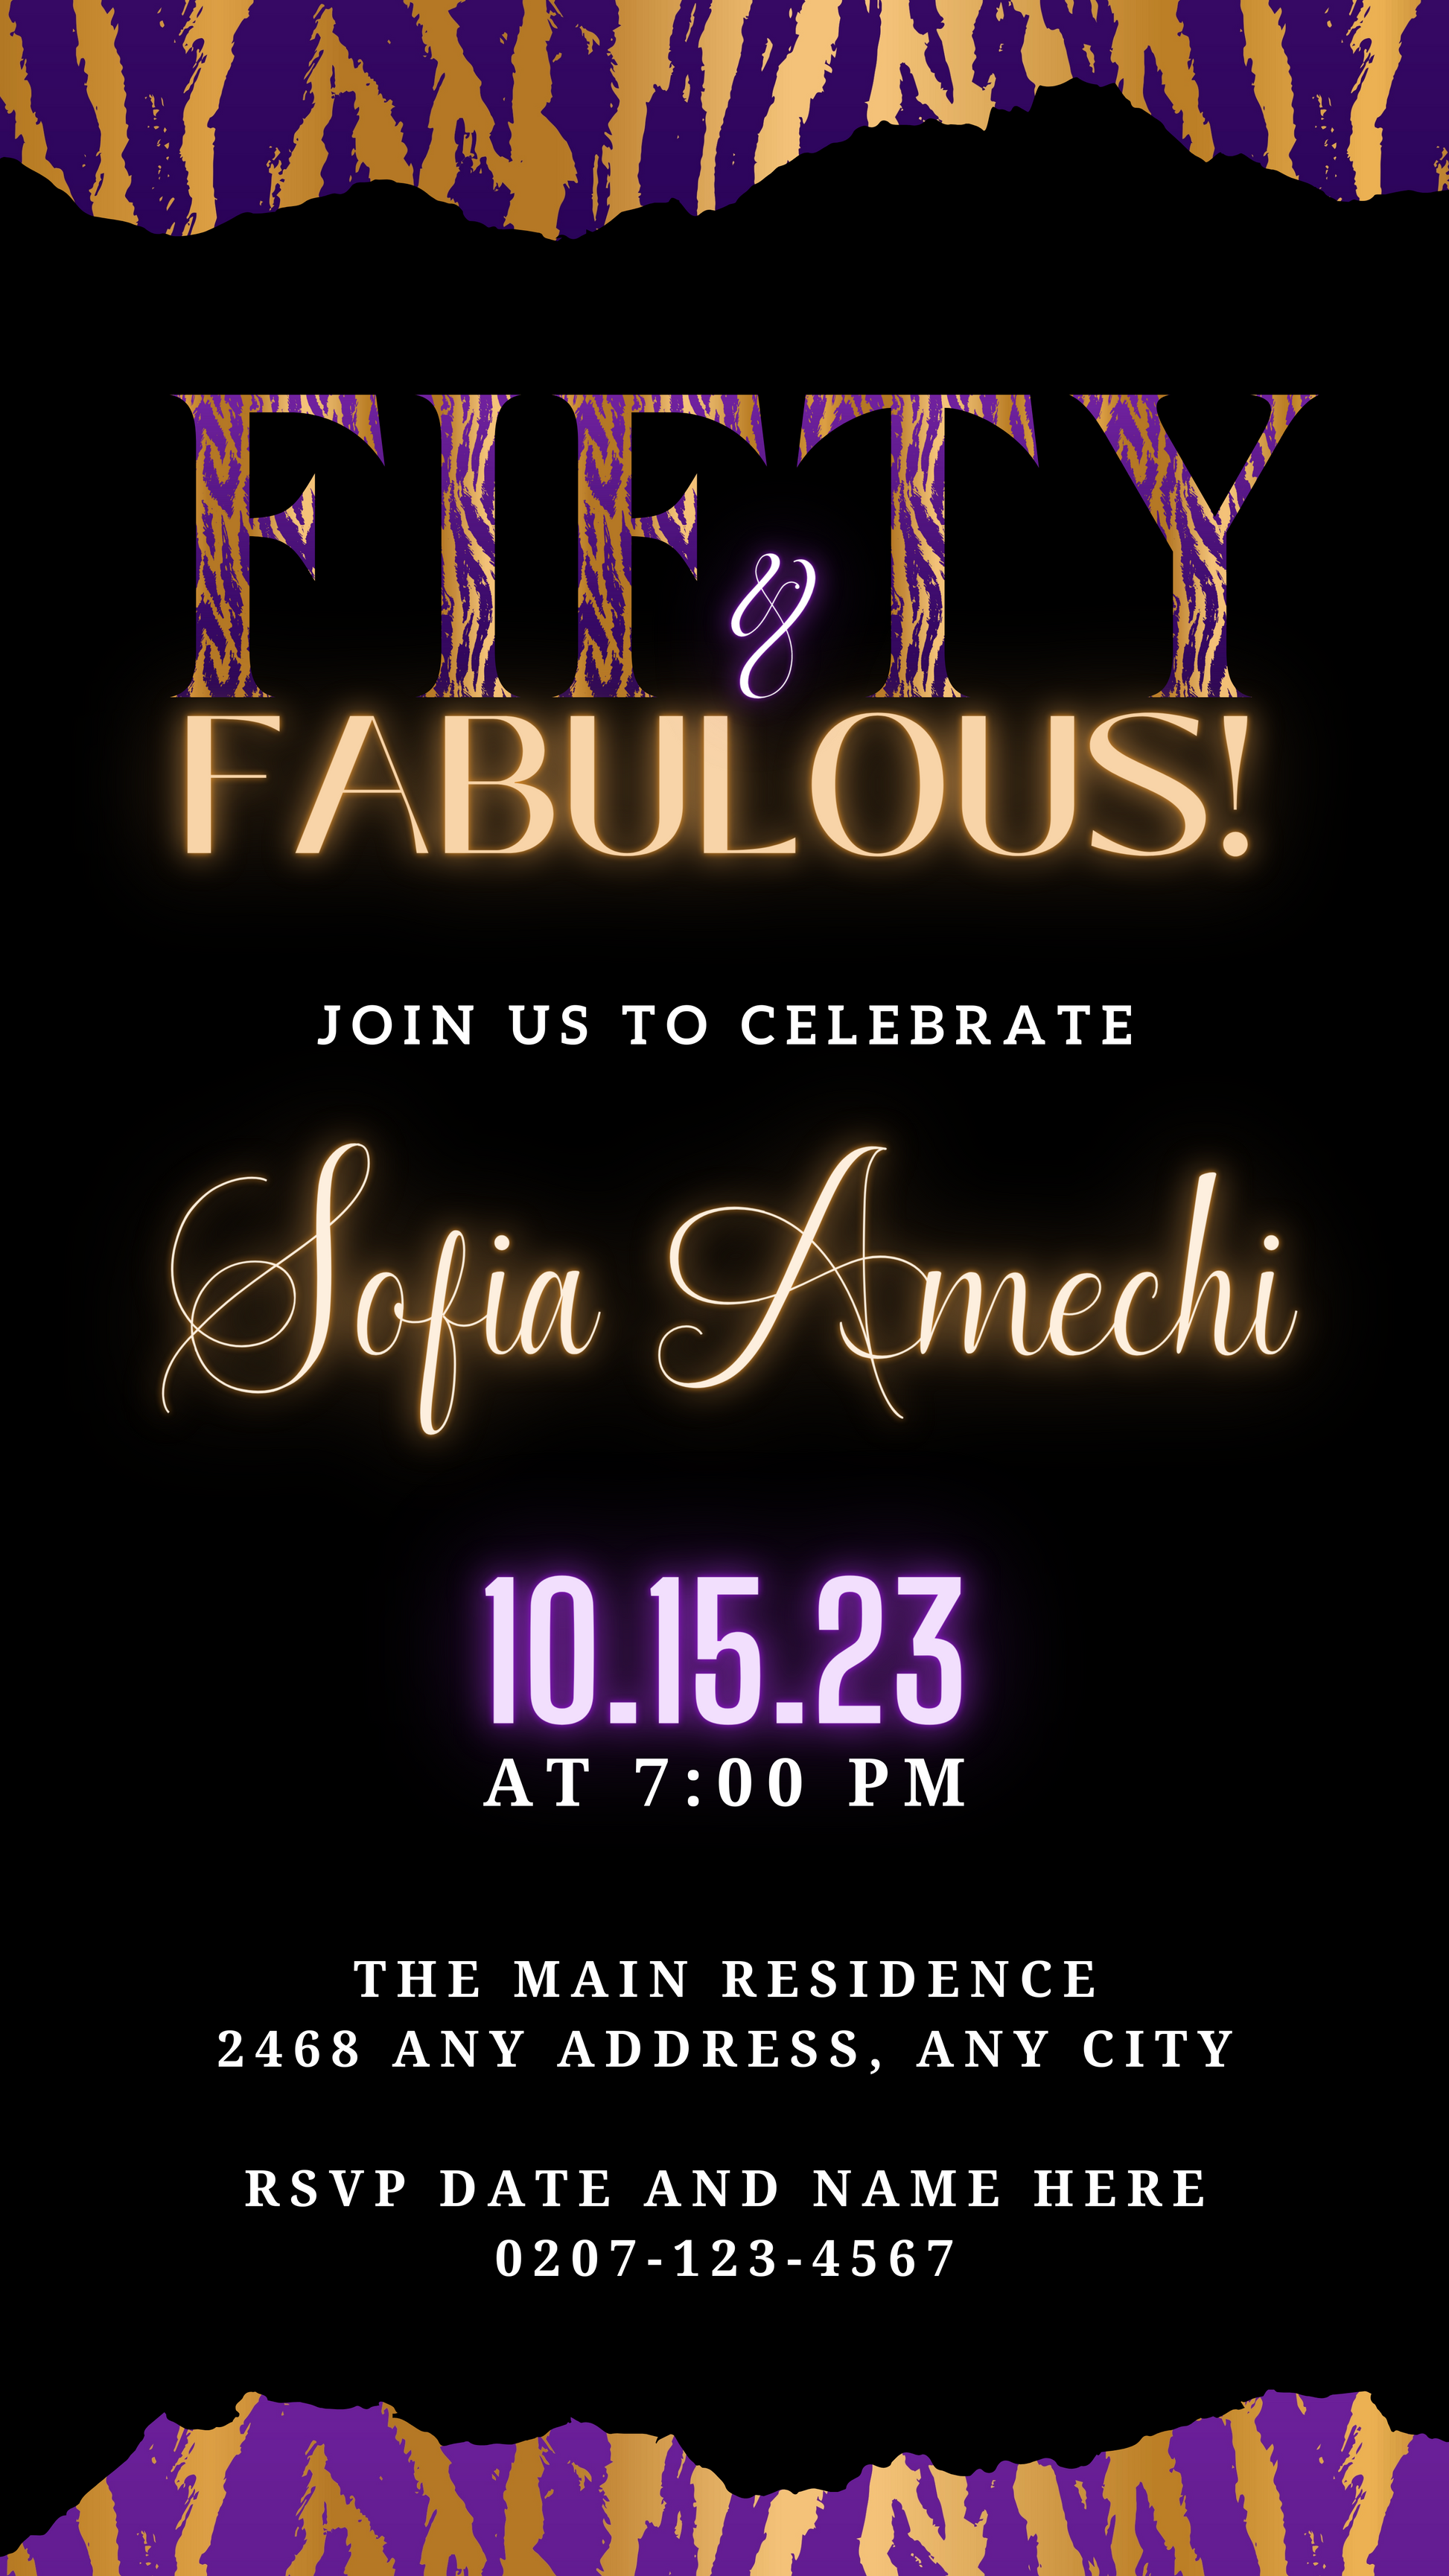 Digital invitation titled Neon Gold Purple Tiger | Fifty & Fabulous Party Evite with customizable text and details, designed for electronic sharing via smartphones.